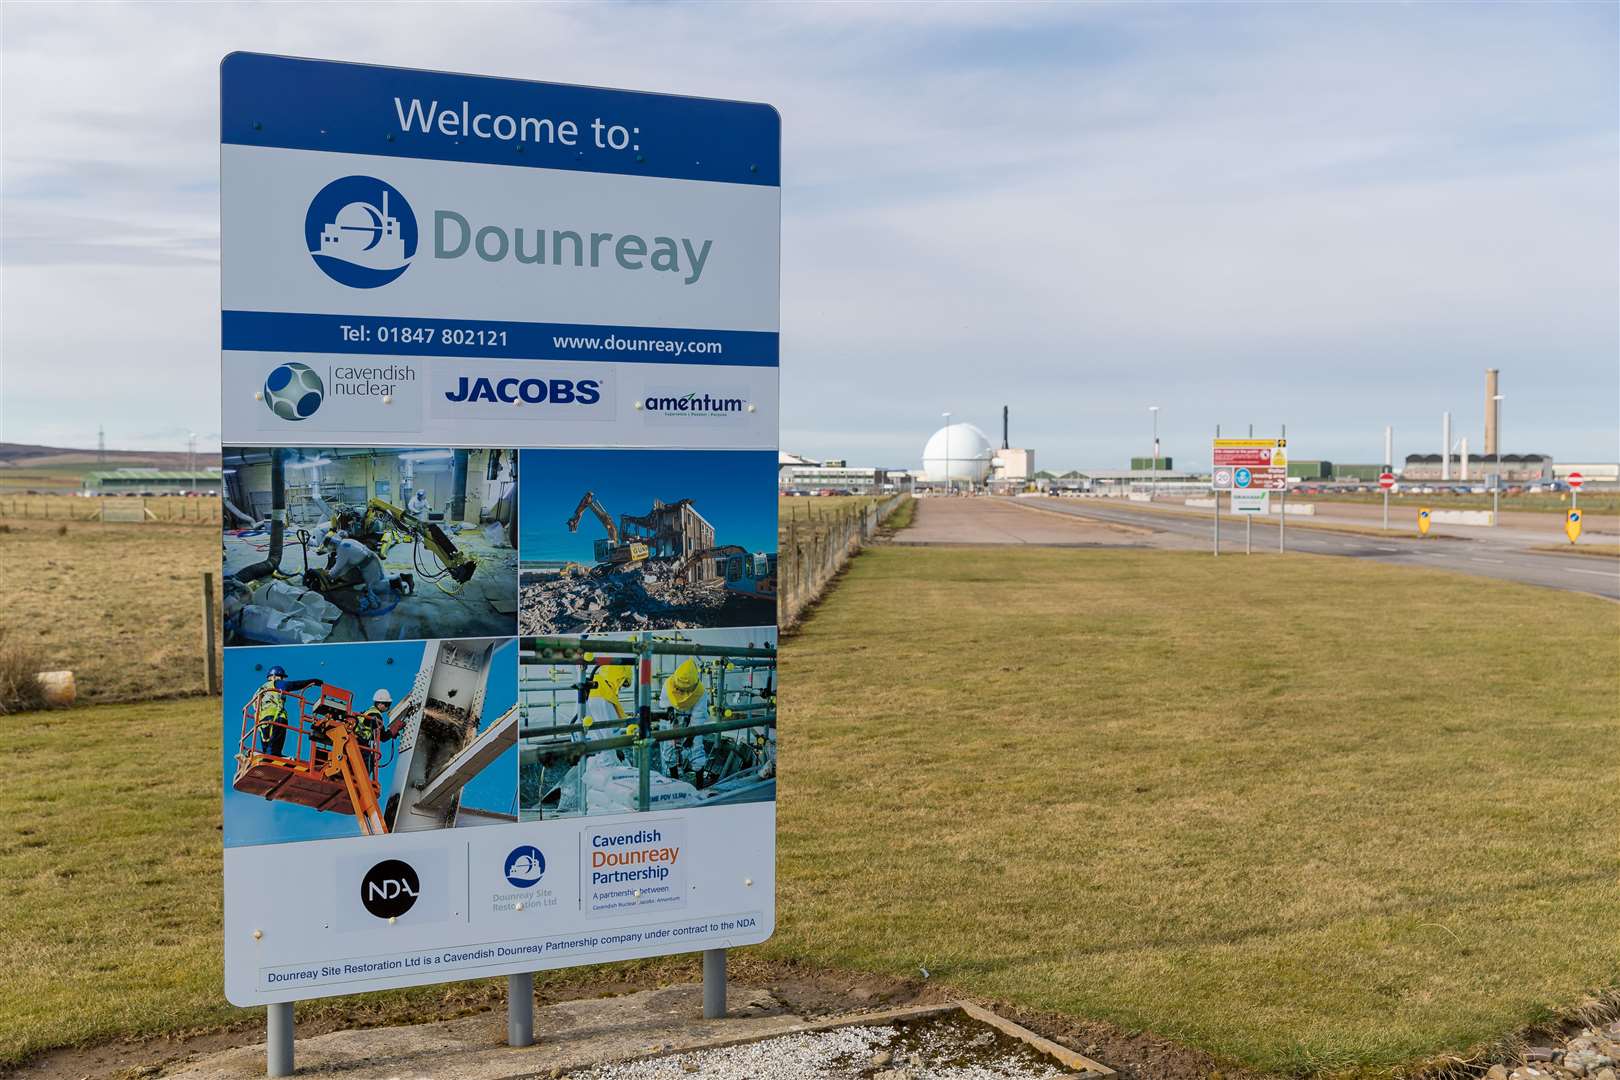 The Nuclear Decommissioning Authority will take over site operations at Dounreay from Cavendish Dounreay Partnership. Picture: DSRL / NDA